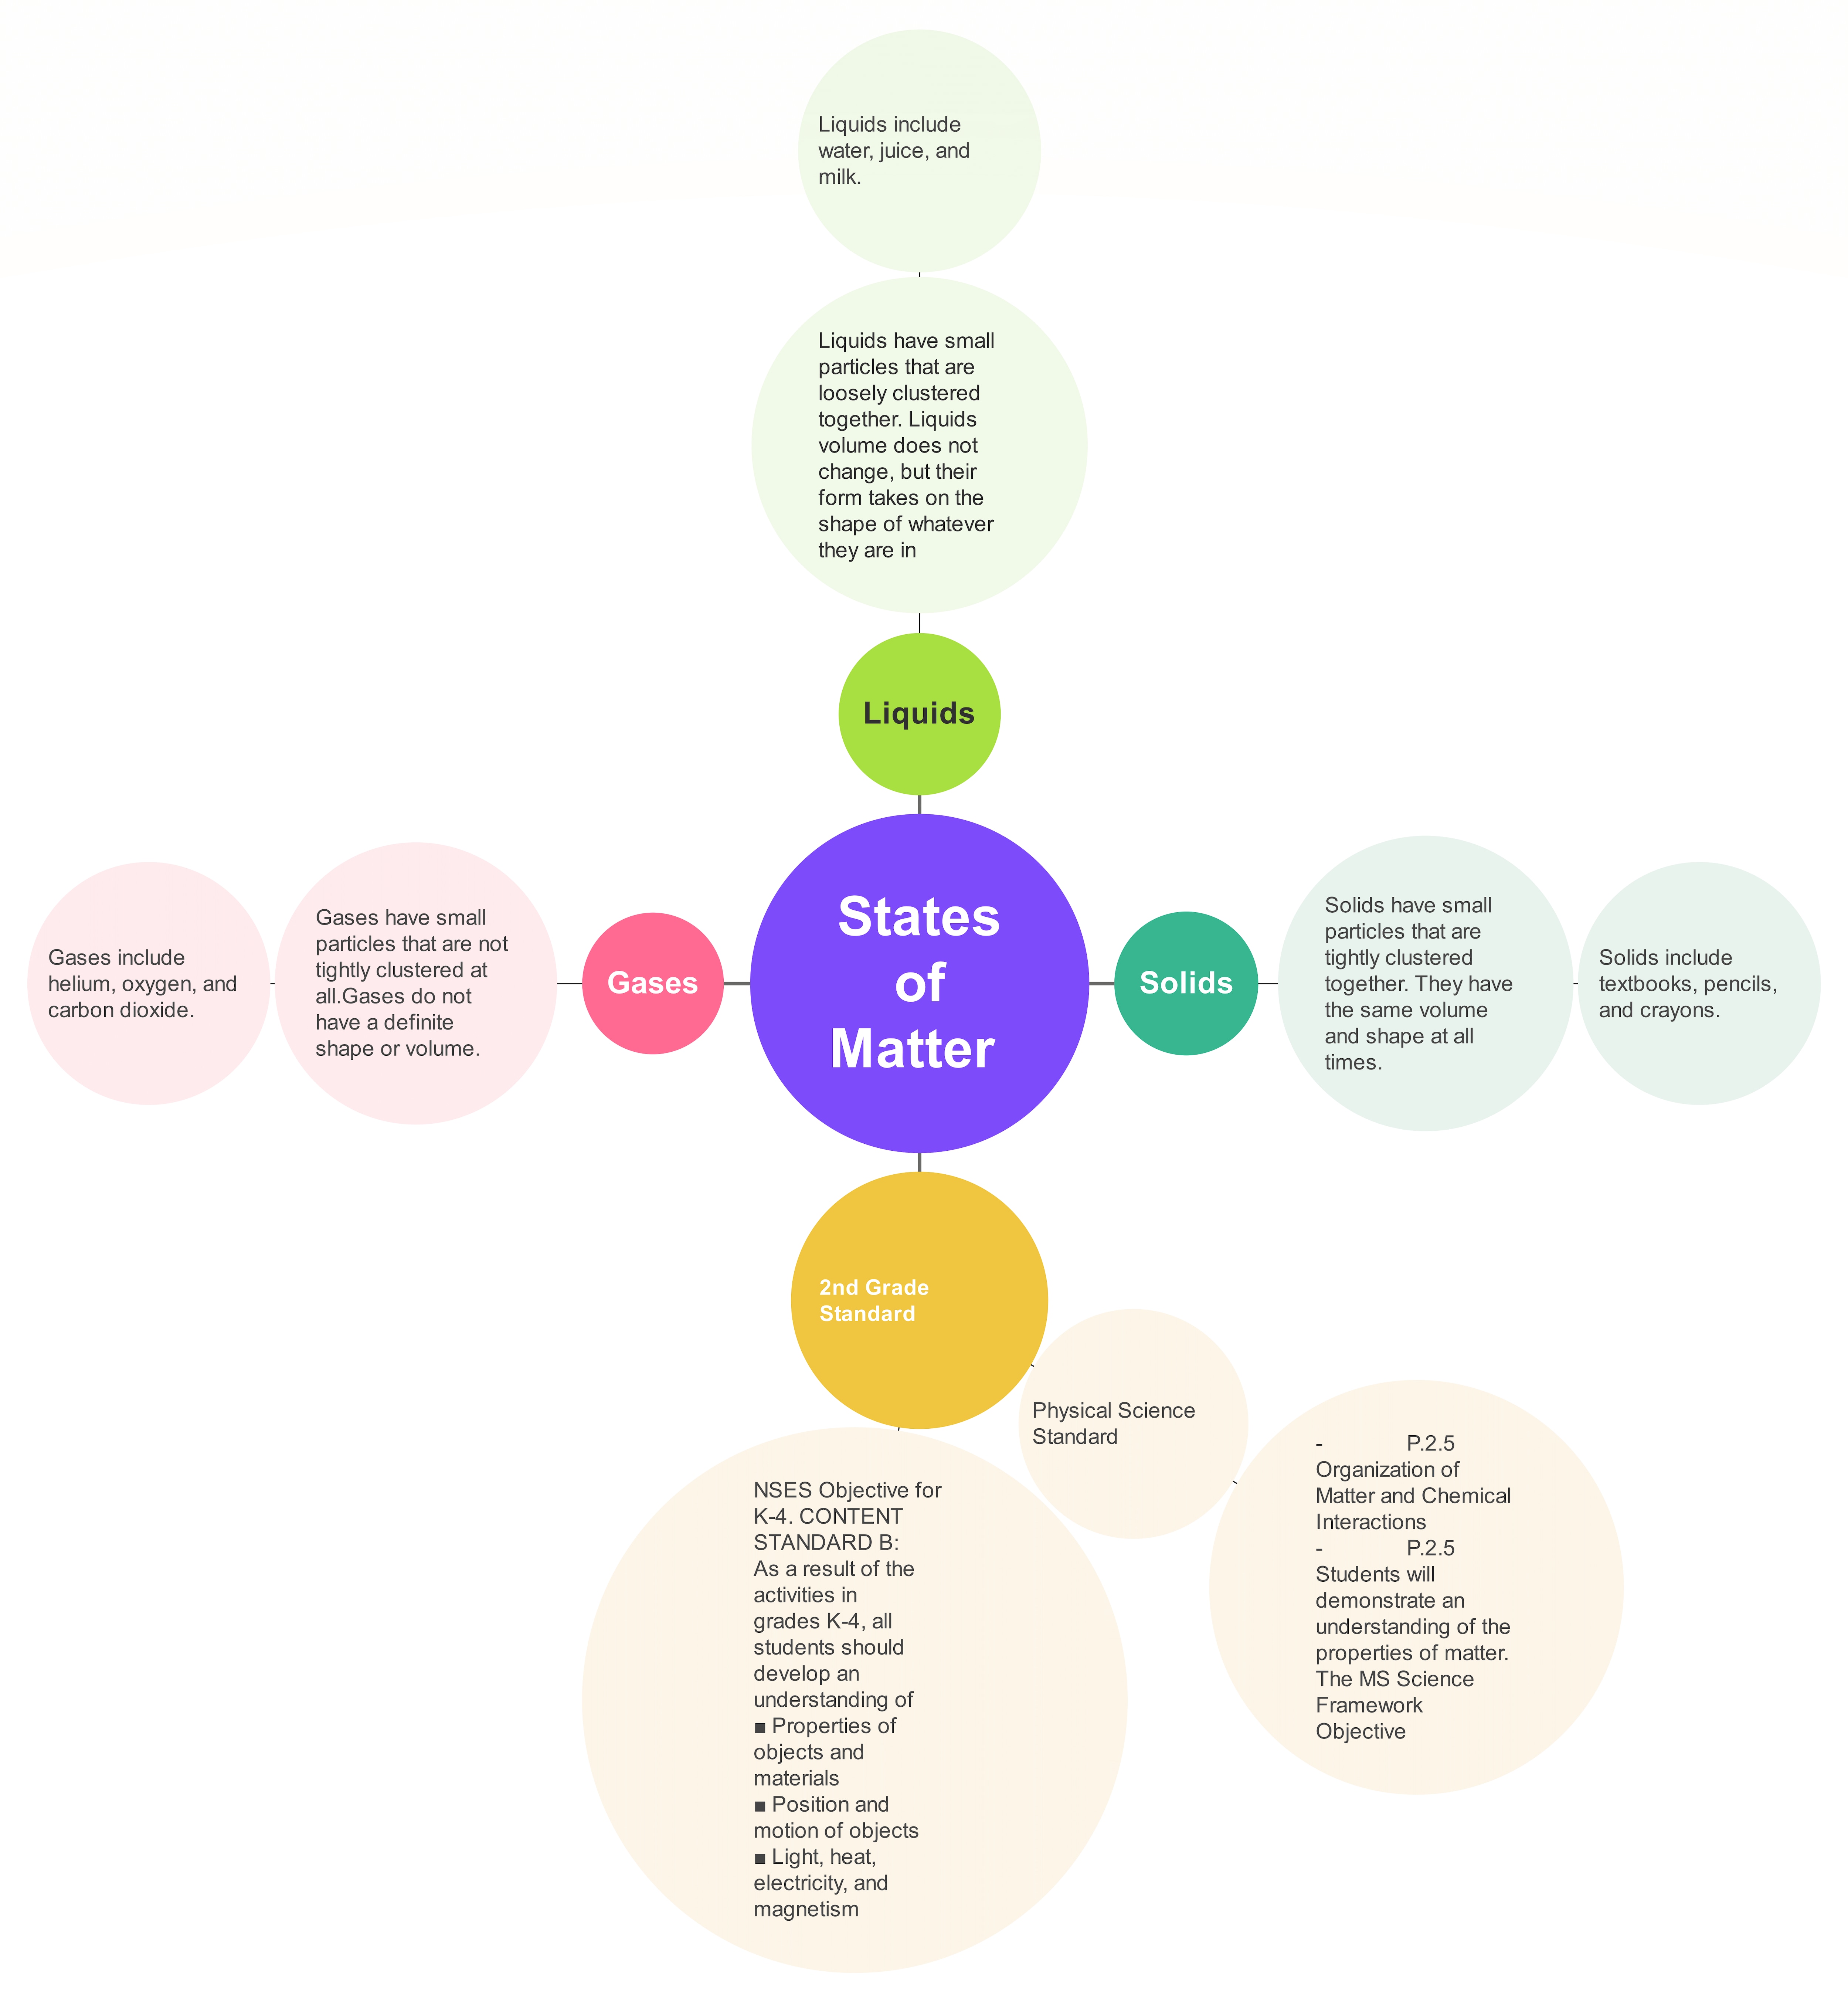 State of Matter Concept Map